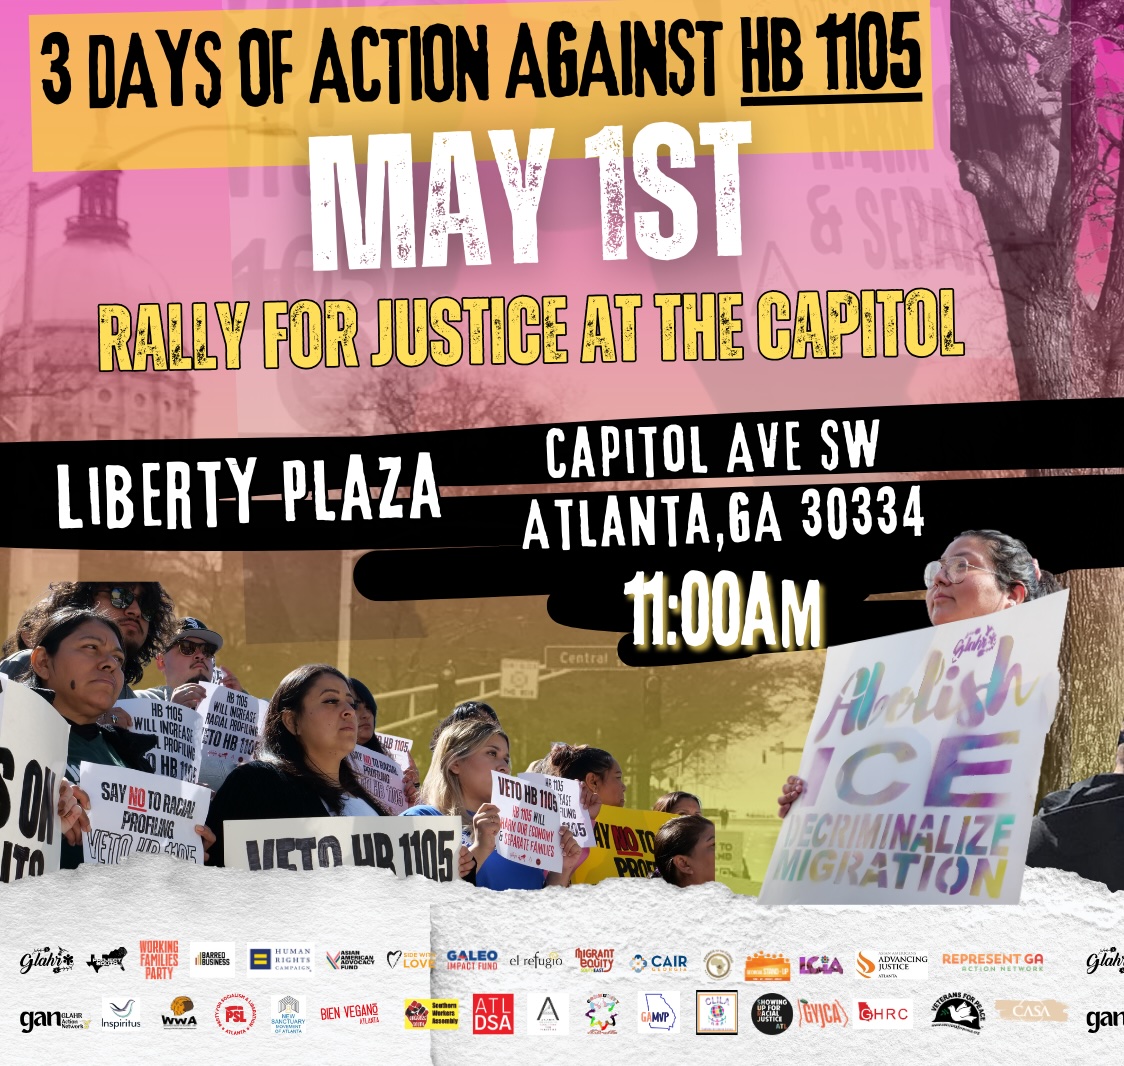 TOMORROW in ATLANTA! Join @GLAHR_, @ProjectSouth, & our allies for a rally at Liberty Plaza in front of the Capitol! This event marks the beginning of our 3-Day Week of Action against HB 1105, a bill that threatens the well-being and rights of immigrant communities in Georgia.